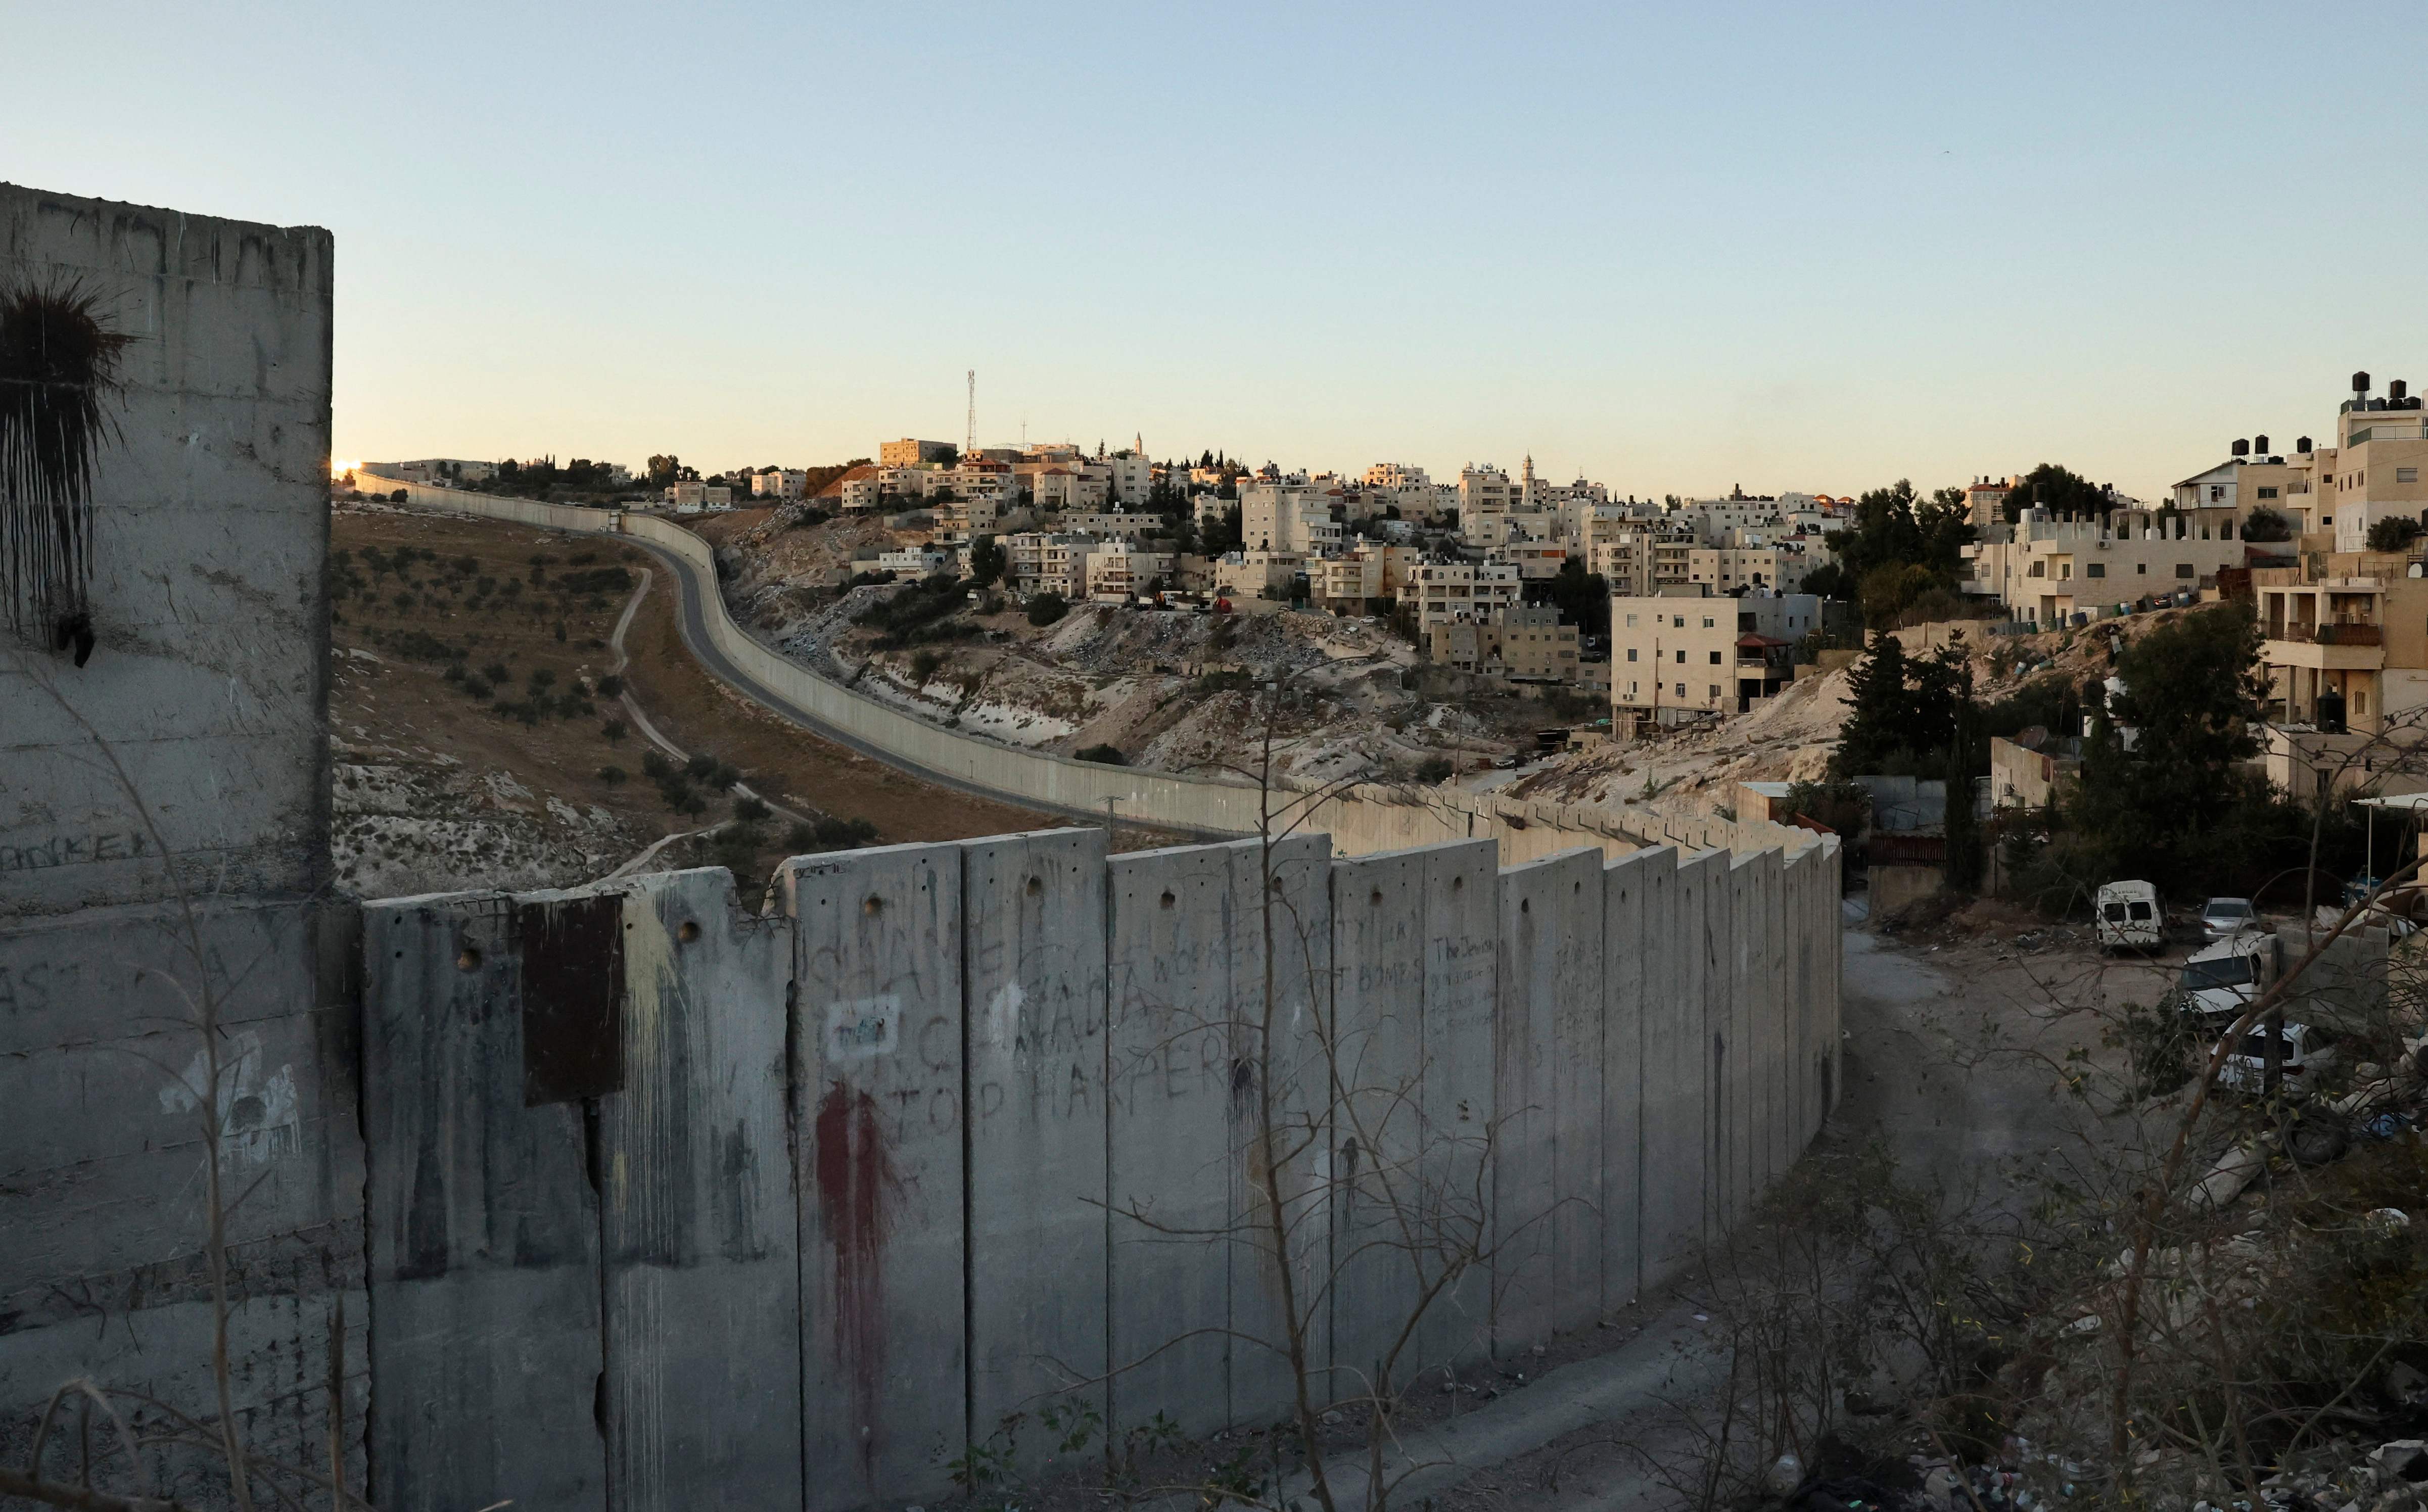 <p>Israel's separation barrier cutting through the West Bank</p>